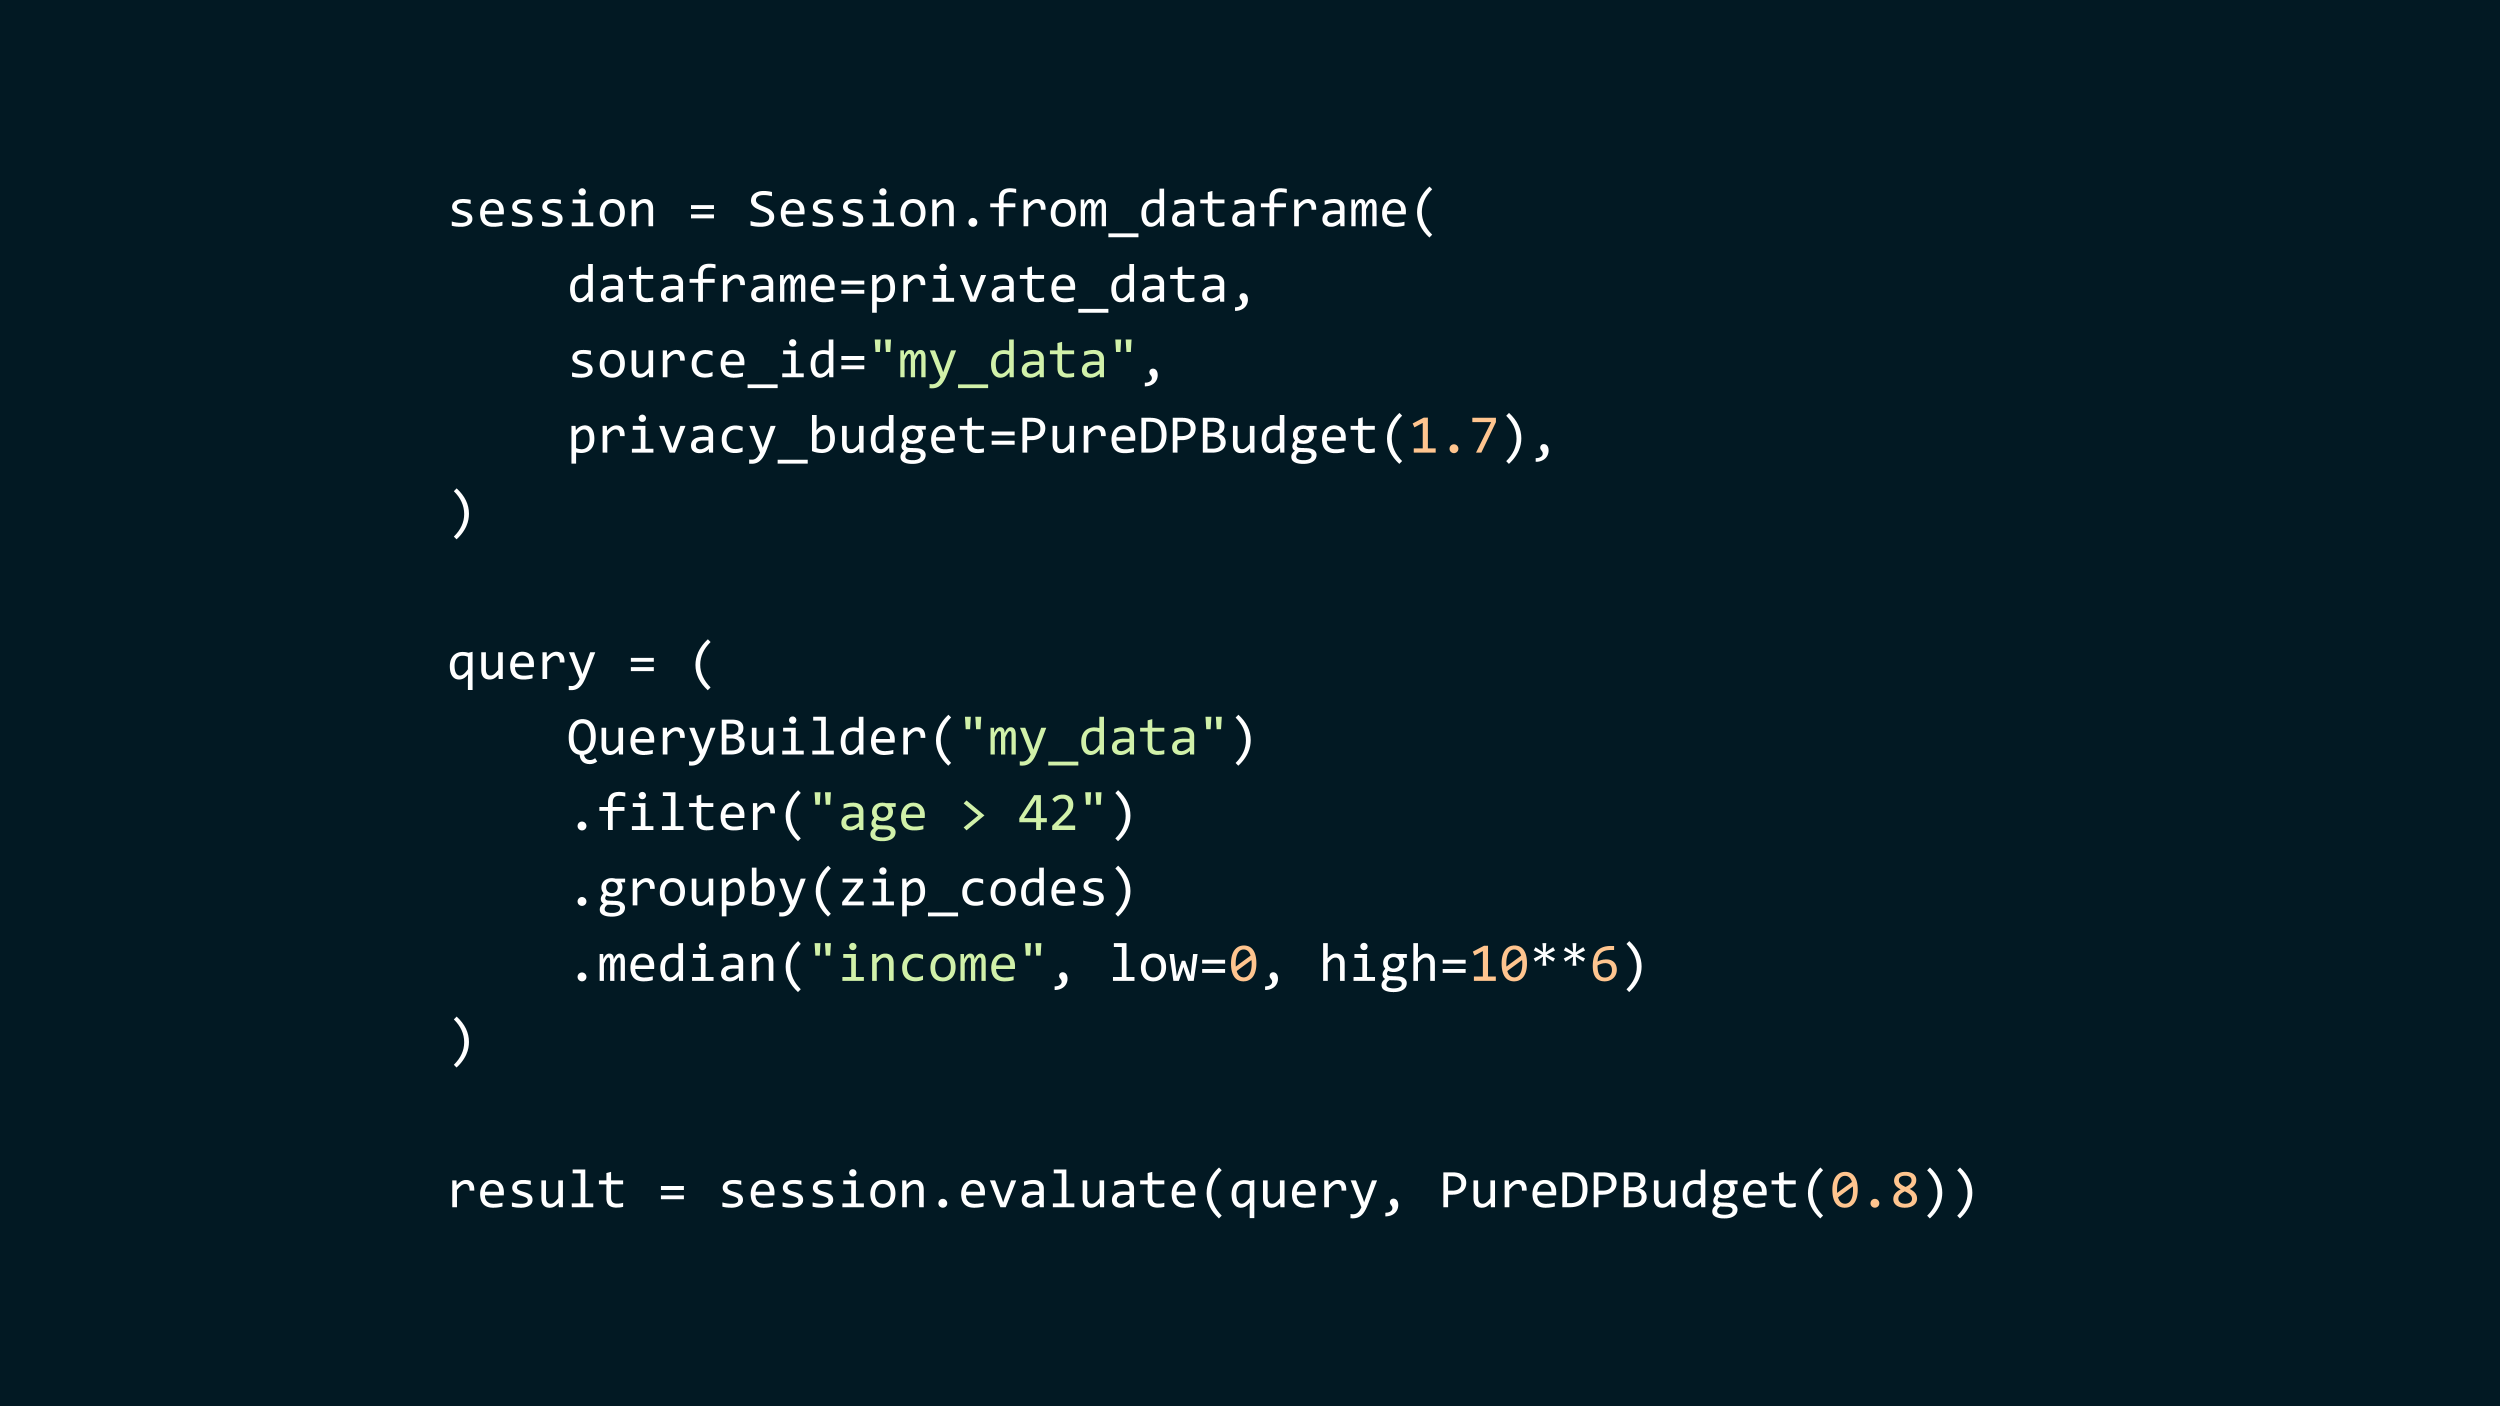 A Python code snippet.
session = Session.from_dataframe(
    dataframe=private_data,
    source_id="my_data",
    privacy_budget=PureDPBudget(1.7),
)
query = (
    QueryBuilder("my_data")
    .filter("age > 42")
    .groupby(zip_codes)
    .median("income", low=0, high=10**6)
)